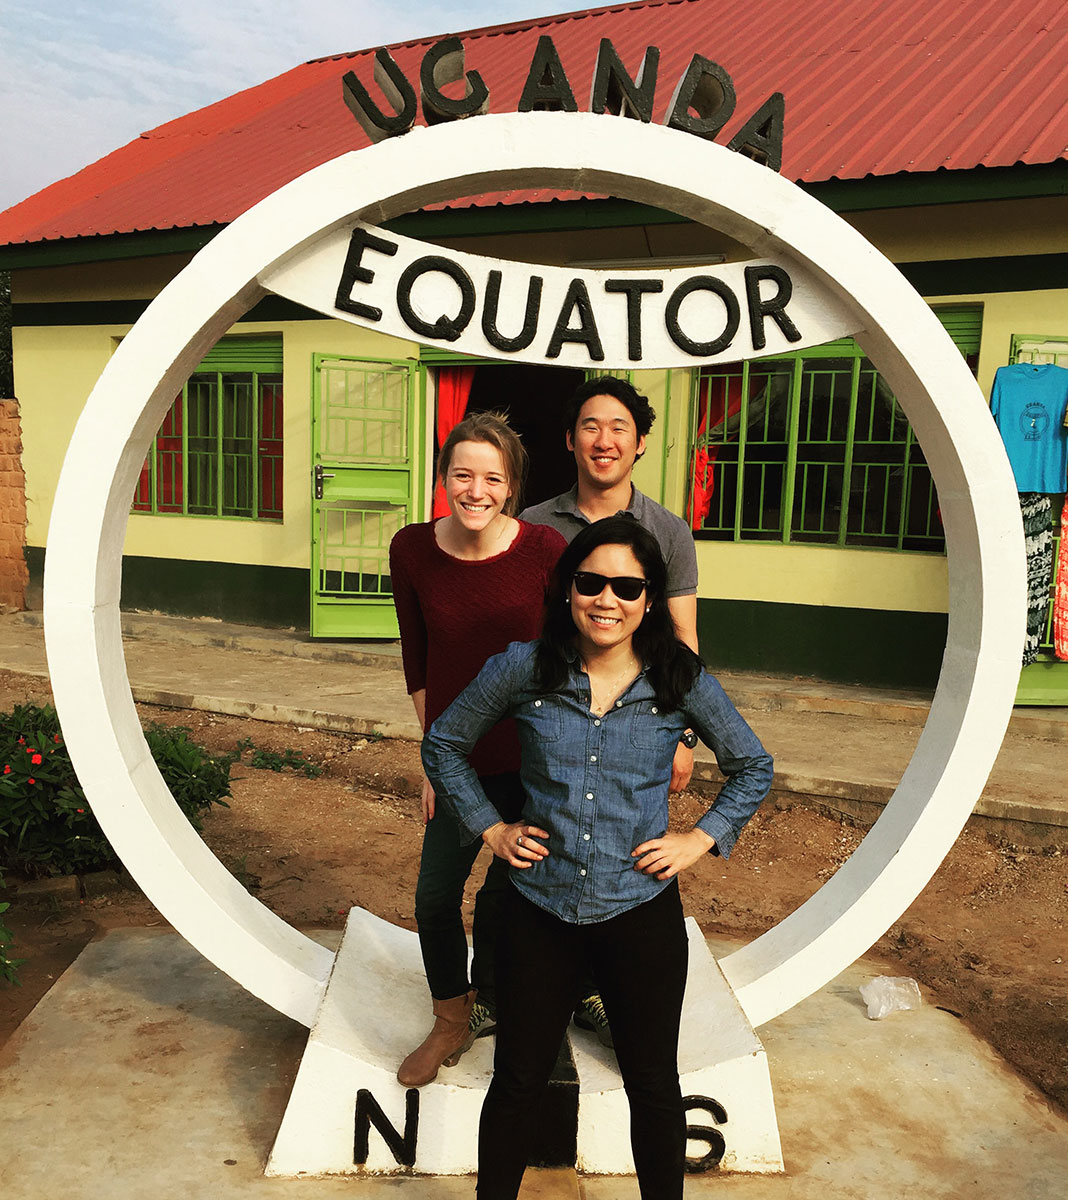 Darden students Christine Thach, Aldea Meary-Miller and Bryan Yoon at the equator. (Photo courtesy of Christine Thach).